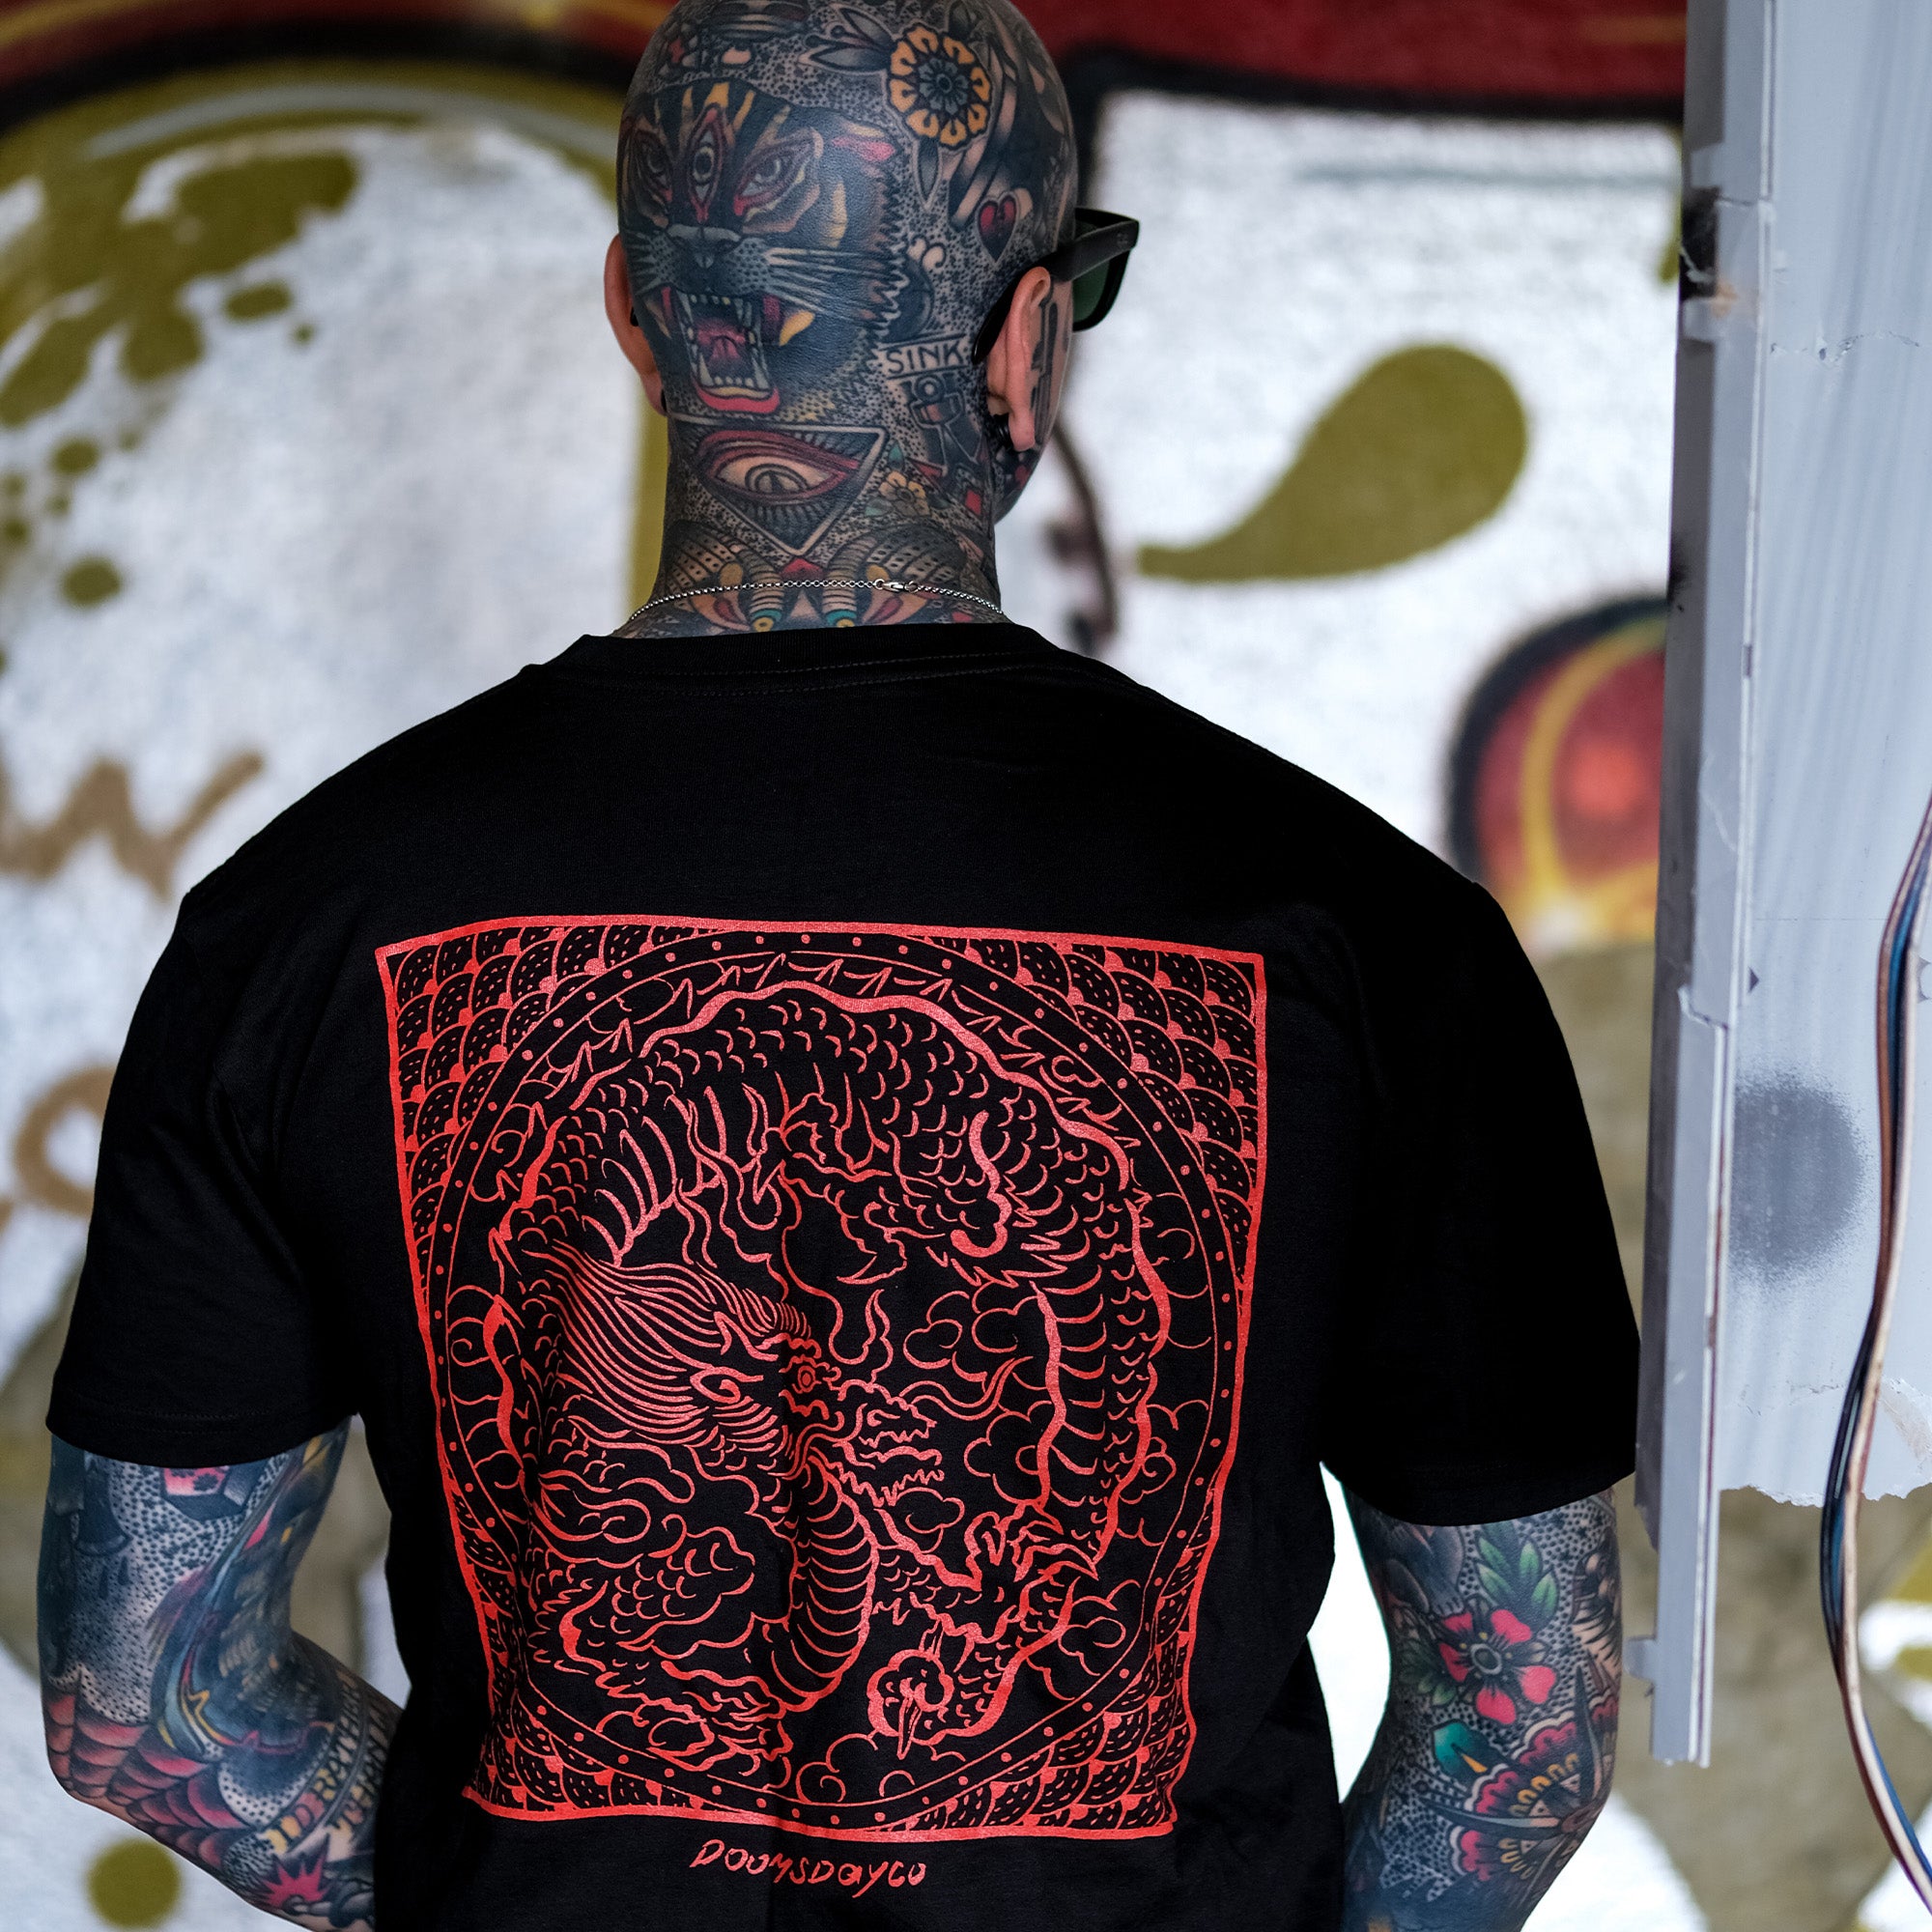 Tattoo inspired T-shirt | Clothes, Artist outfit, Tattoo artists